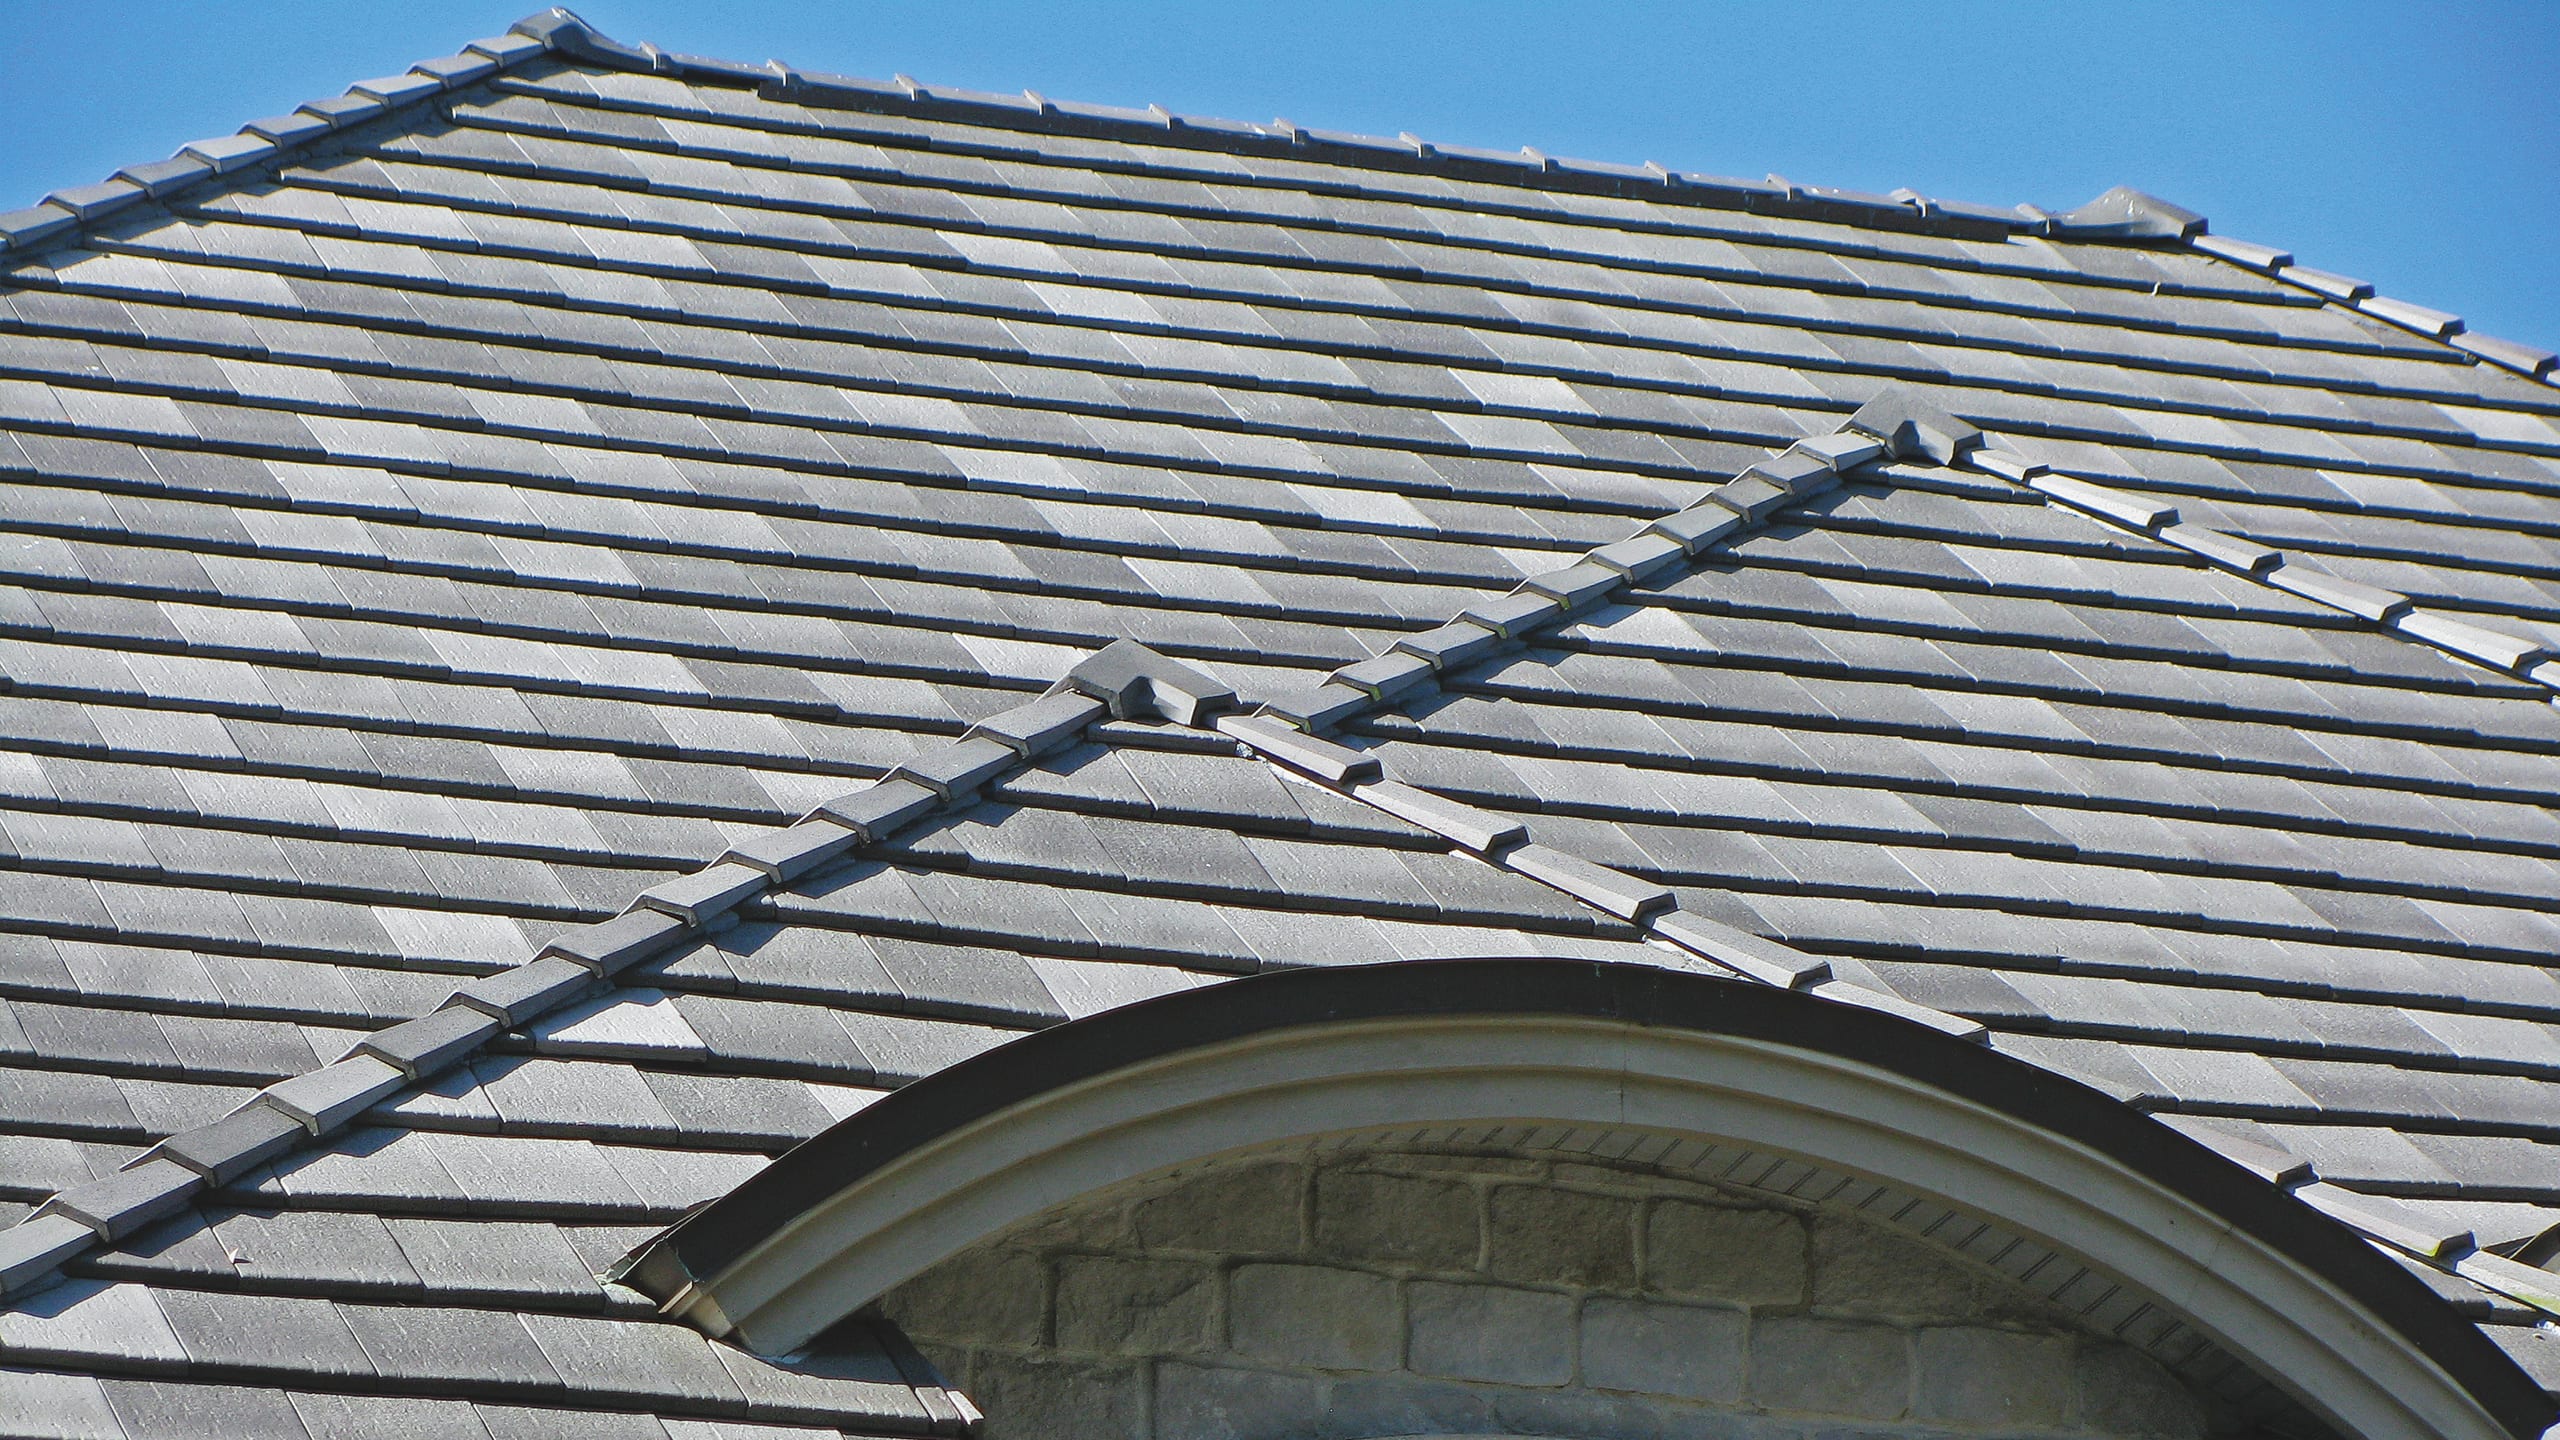 Private Residence - Tampa Ludowici Roof Tile